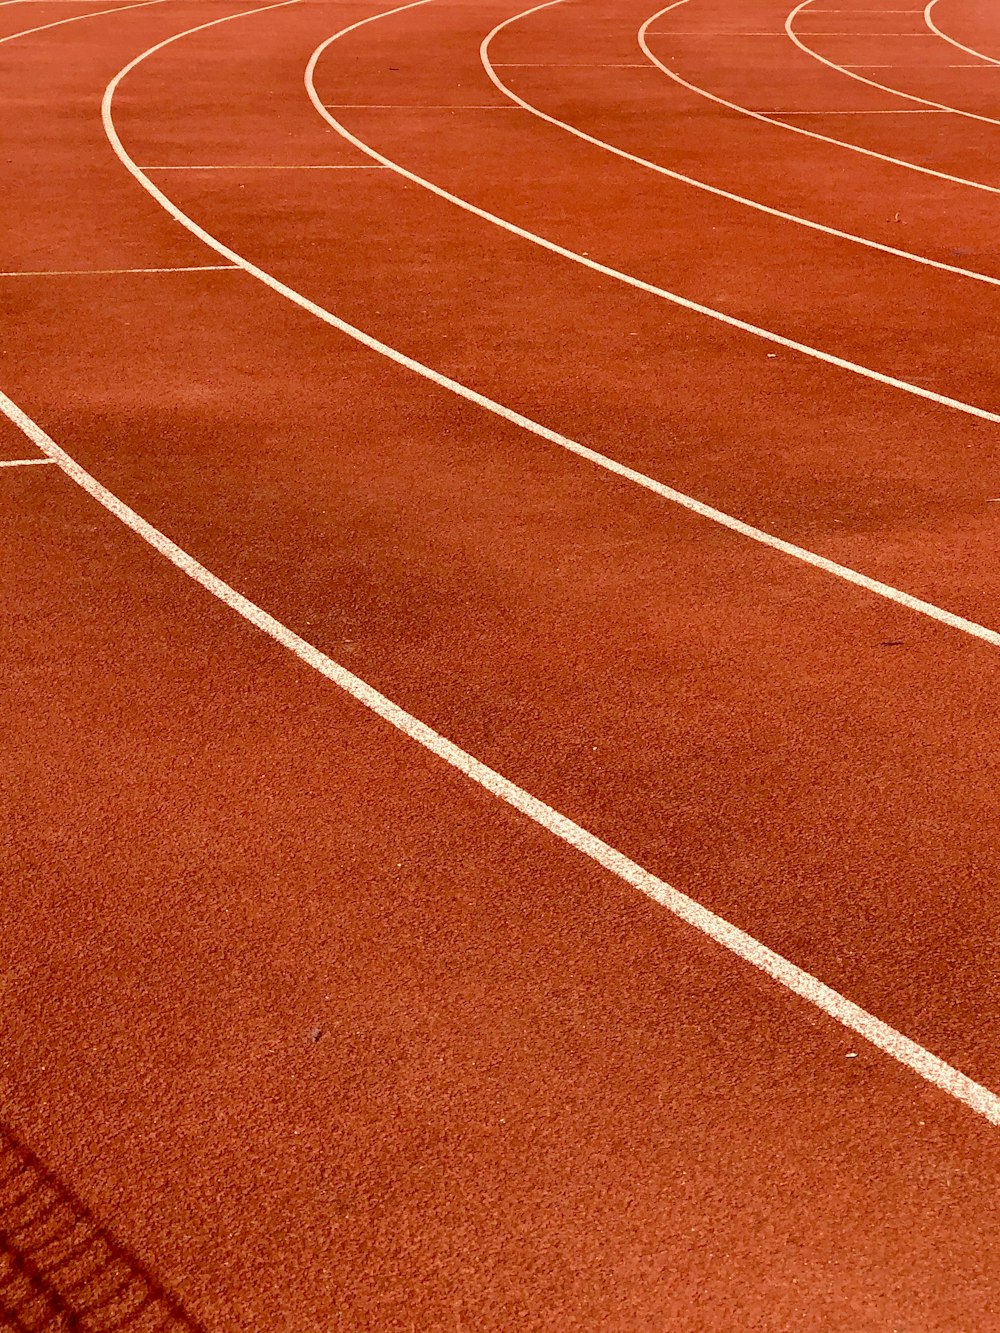 A red running track with white lines on it photo – Free Vinnytsya Image on  Unsplash